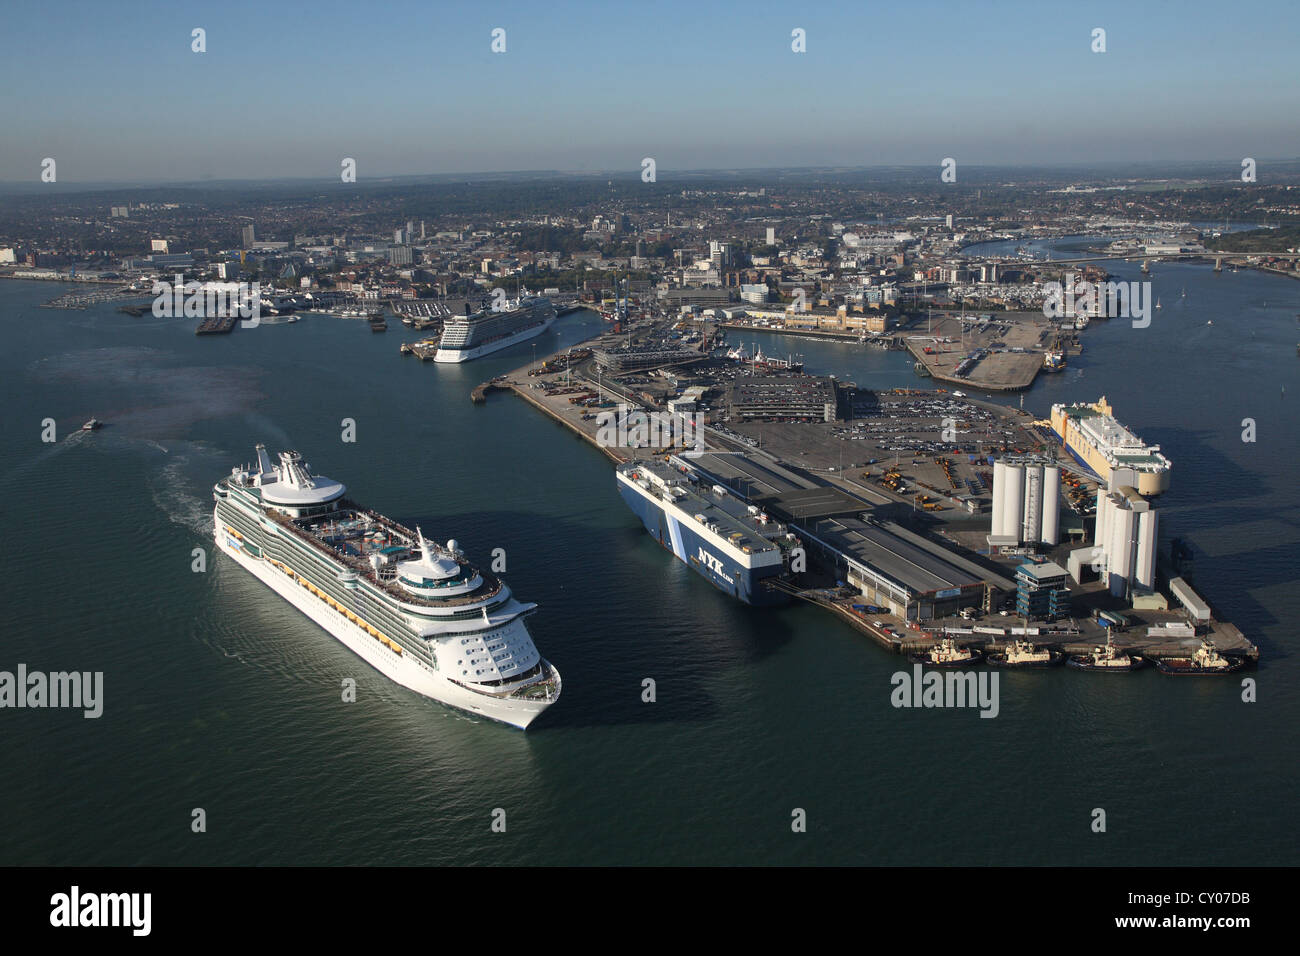 Independence Of The Seas passes Celebrity Eclipse in the port of Southampton. Aerial photos. Stock Photo